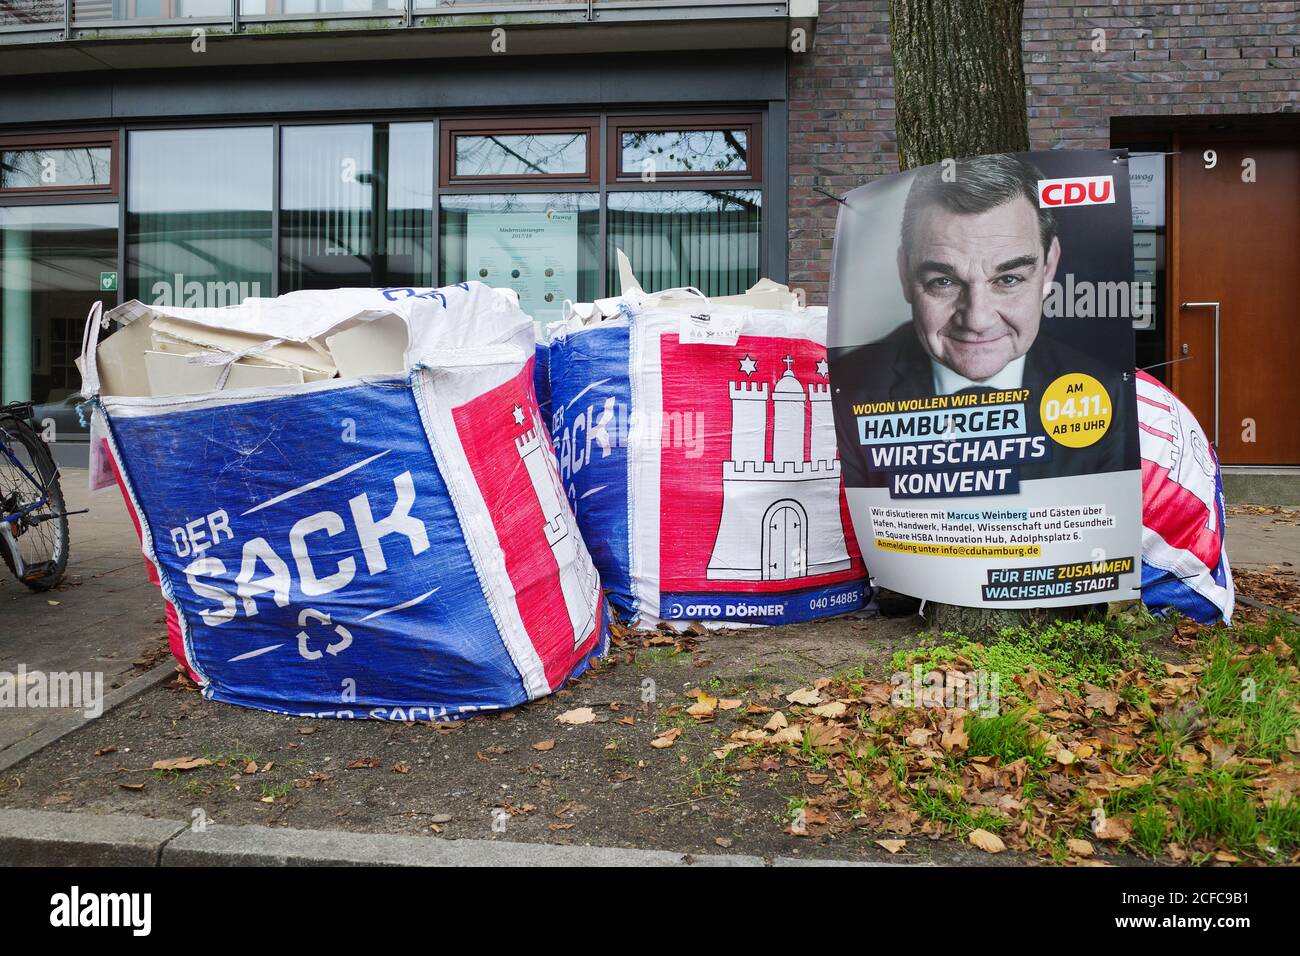 Placard of the CDU. Hamburg state elections, garbage bags with Hamburg coat of arms and the inscription 'Der Sack', Hamburg, Germany, Dec. 02, 2019 Stock Photo